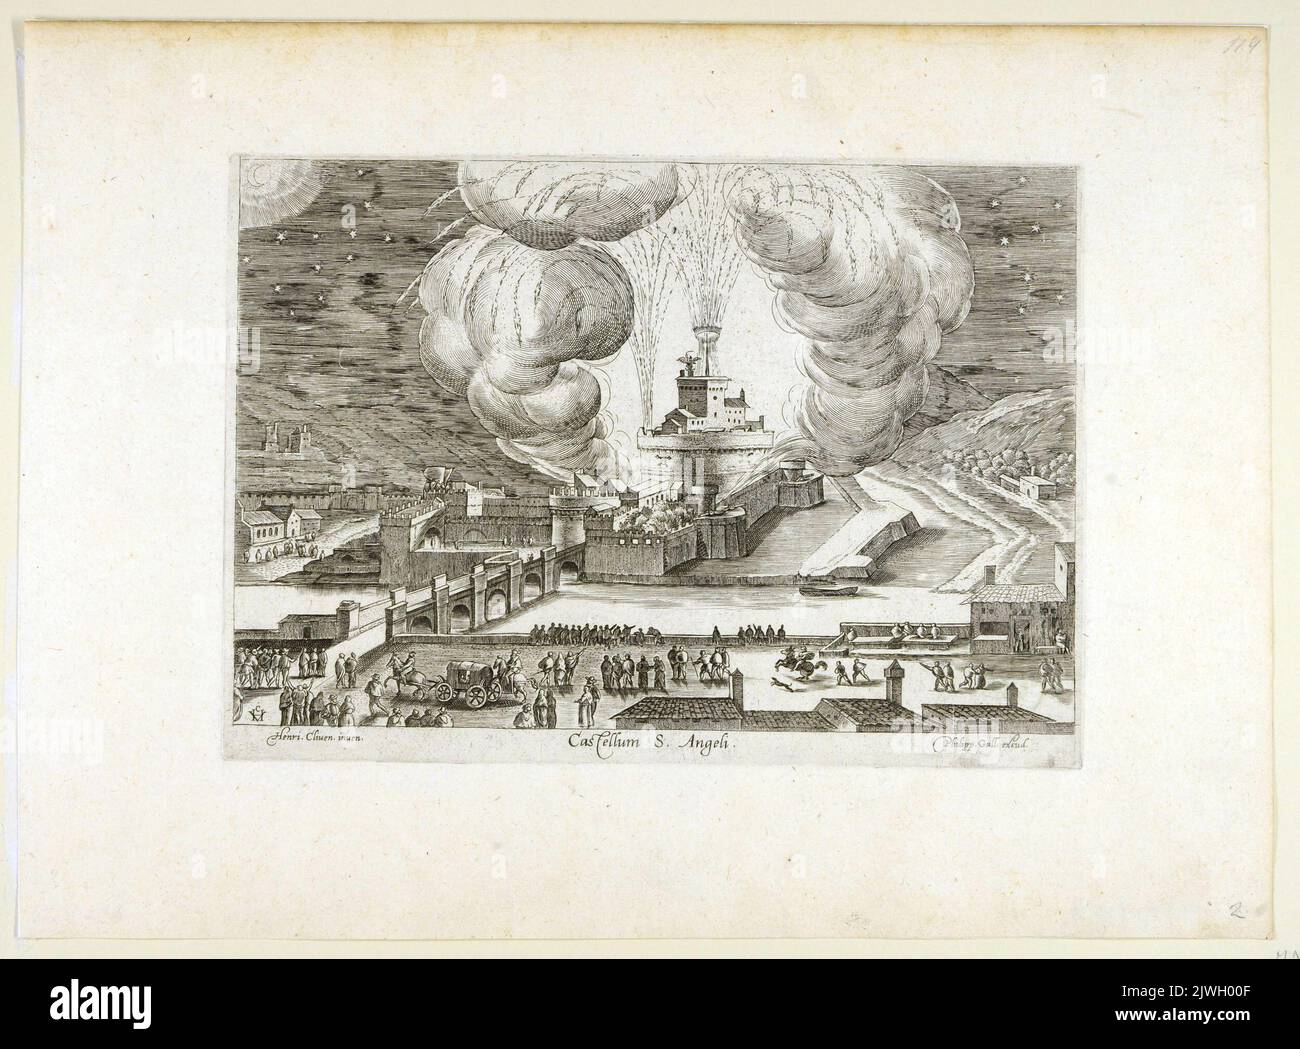 Castel Sant’Angelo in Rome seen at night, illuminated by fireworks. Thirteenth print from the cycle.. Galle, Theodor (1571-1633), graphic artist, Galle, Philips (1537-1612), graphic artist, Cleve, Hendrick van, III (ca 1525-1589), draughtsman, cartoonist Stock Photo